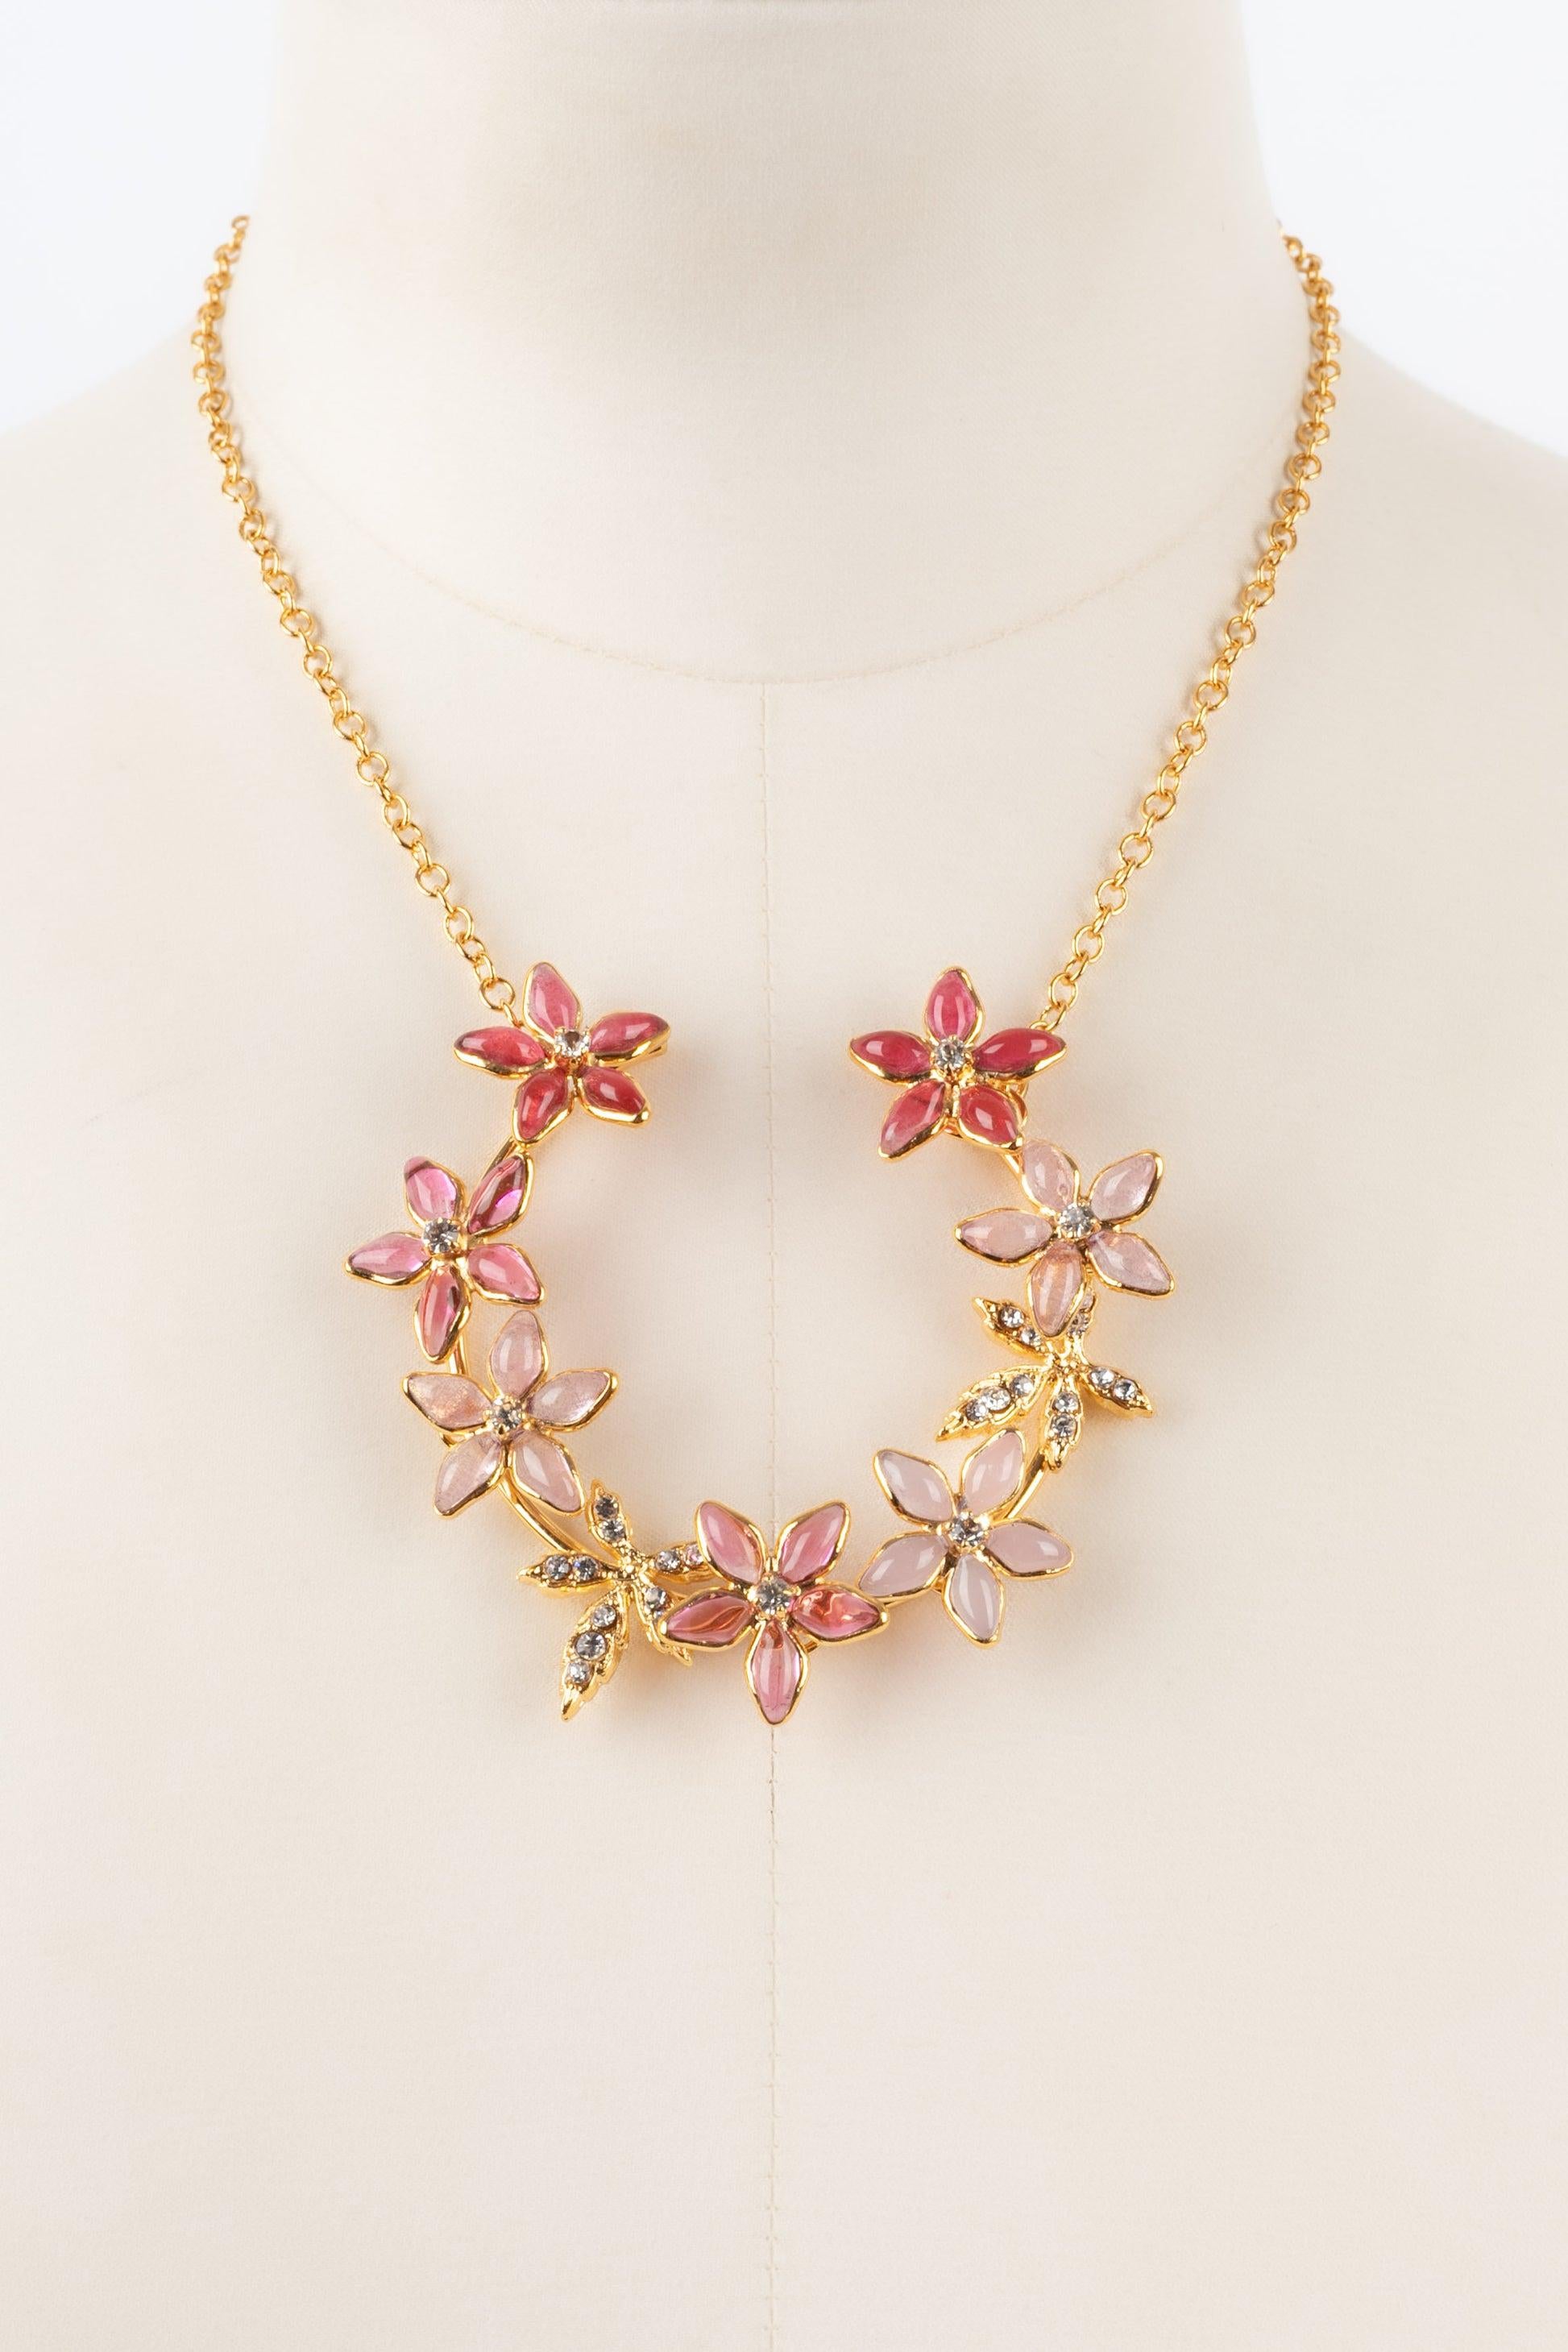 Augustine - Golden metal necklace with rhinestones and glass paste in pink stones.

Additional information:
Condition: Very good condition
Dimensions: Length: 38 cm to 43 cm

Seller Reference: BC234